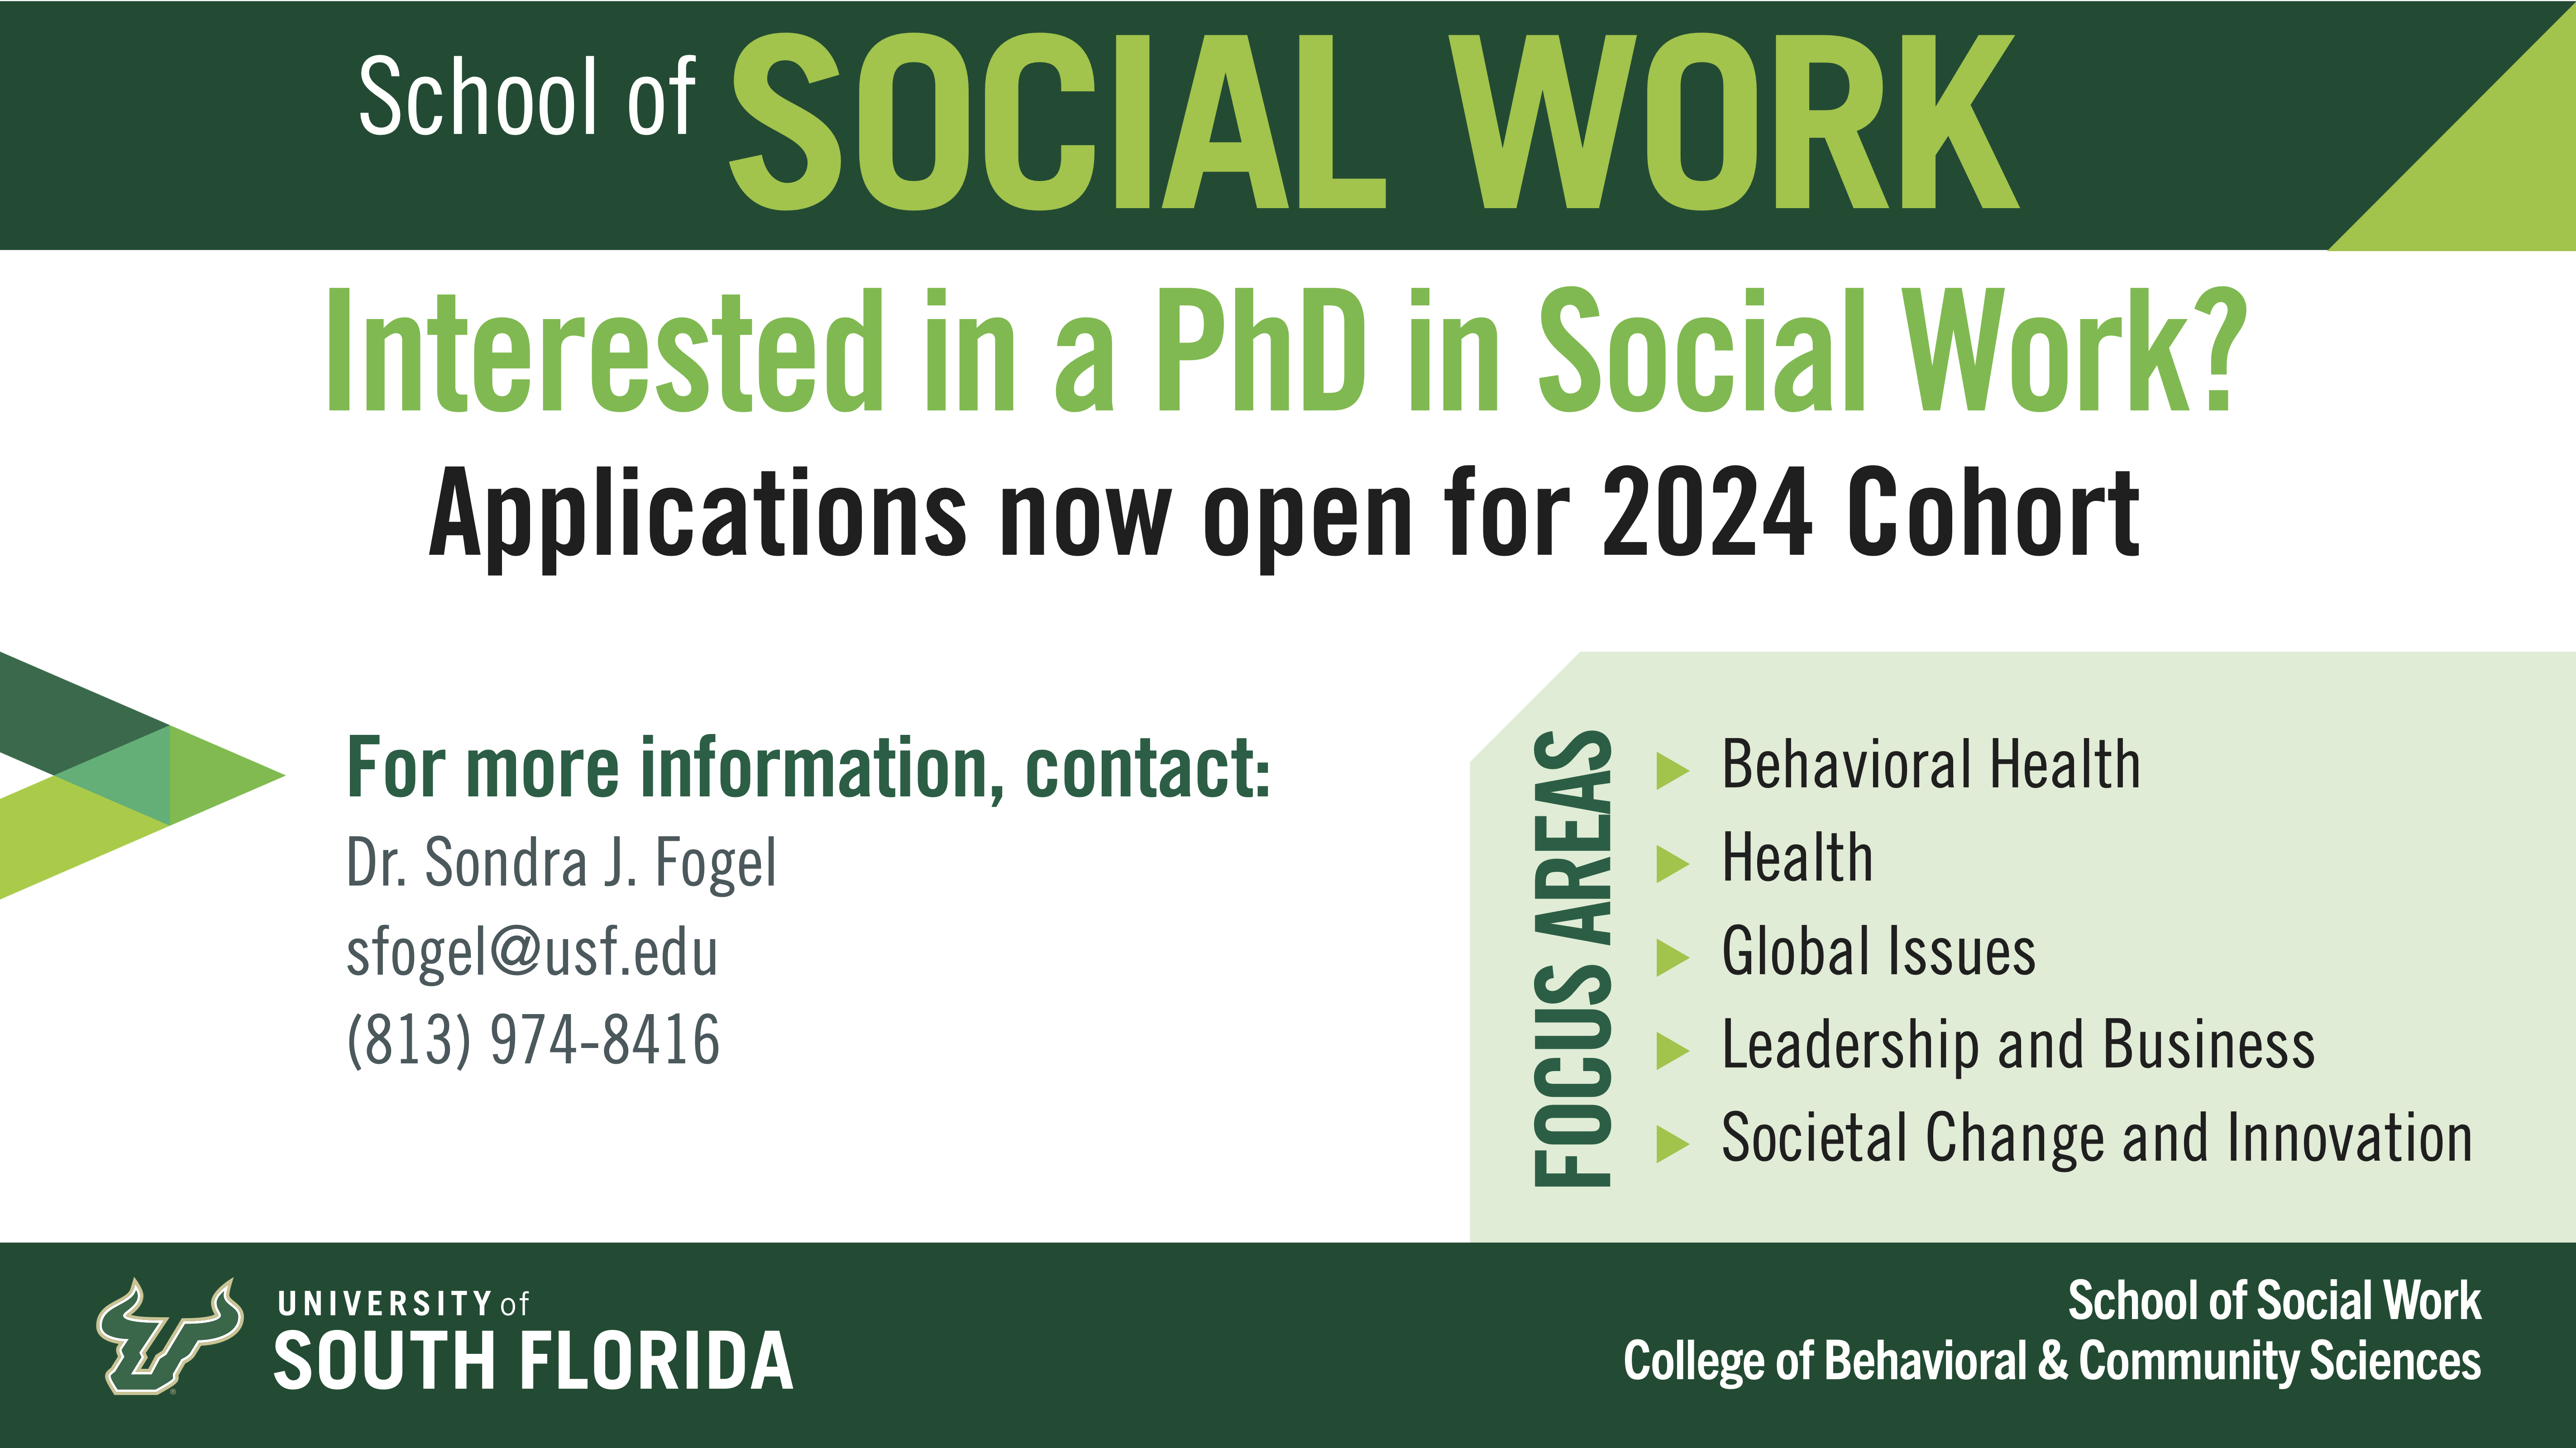 School of Social Work: Interested in a PhD in Social Work? Applications now open for 2024 Cohort For more information, contact: Dr. Sondra J. Fogel sfogel@usf.edu (813) 974-8416 Focus areas: Behavioral Health, Health, Global Issues, Leadership and Business, Societal Change and Innovation